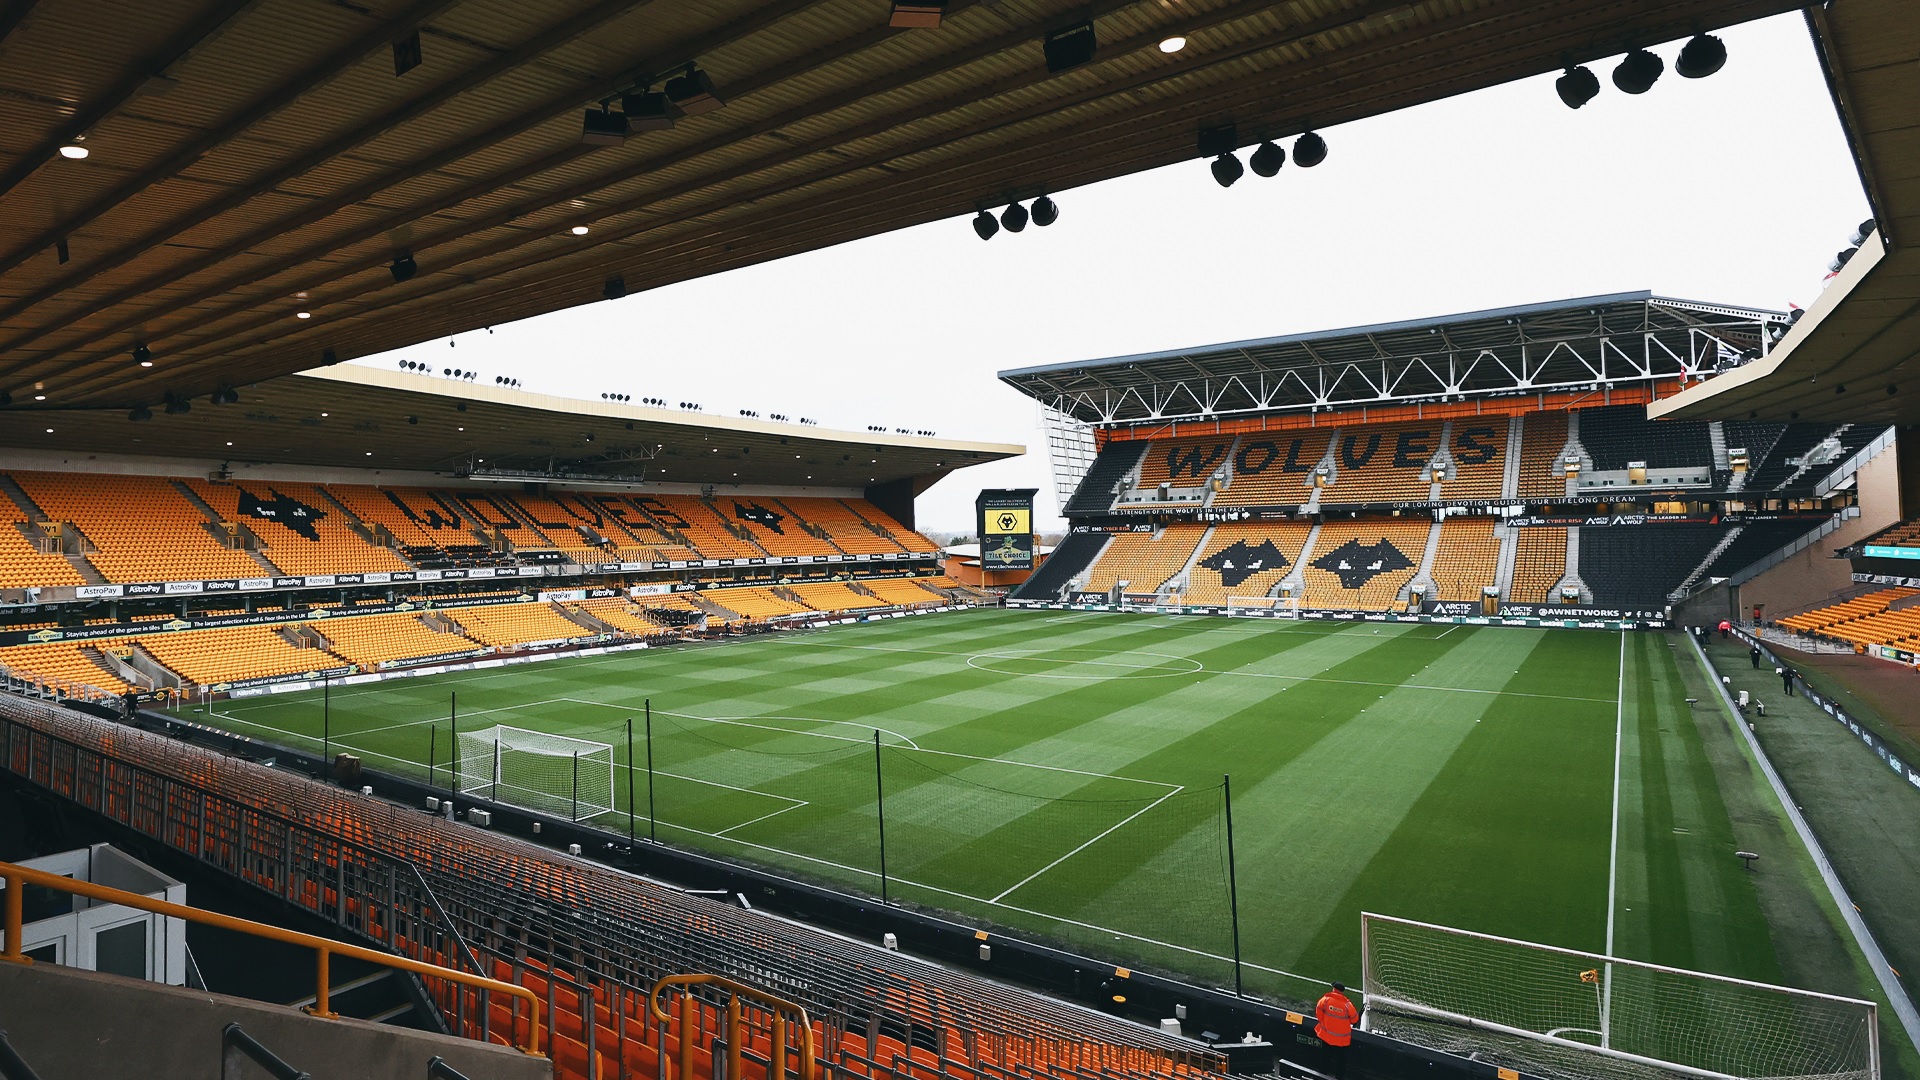 Wolves tickets: How to buy Wolves tickets for Premier League games at Molineux Stadium